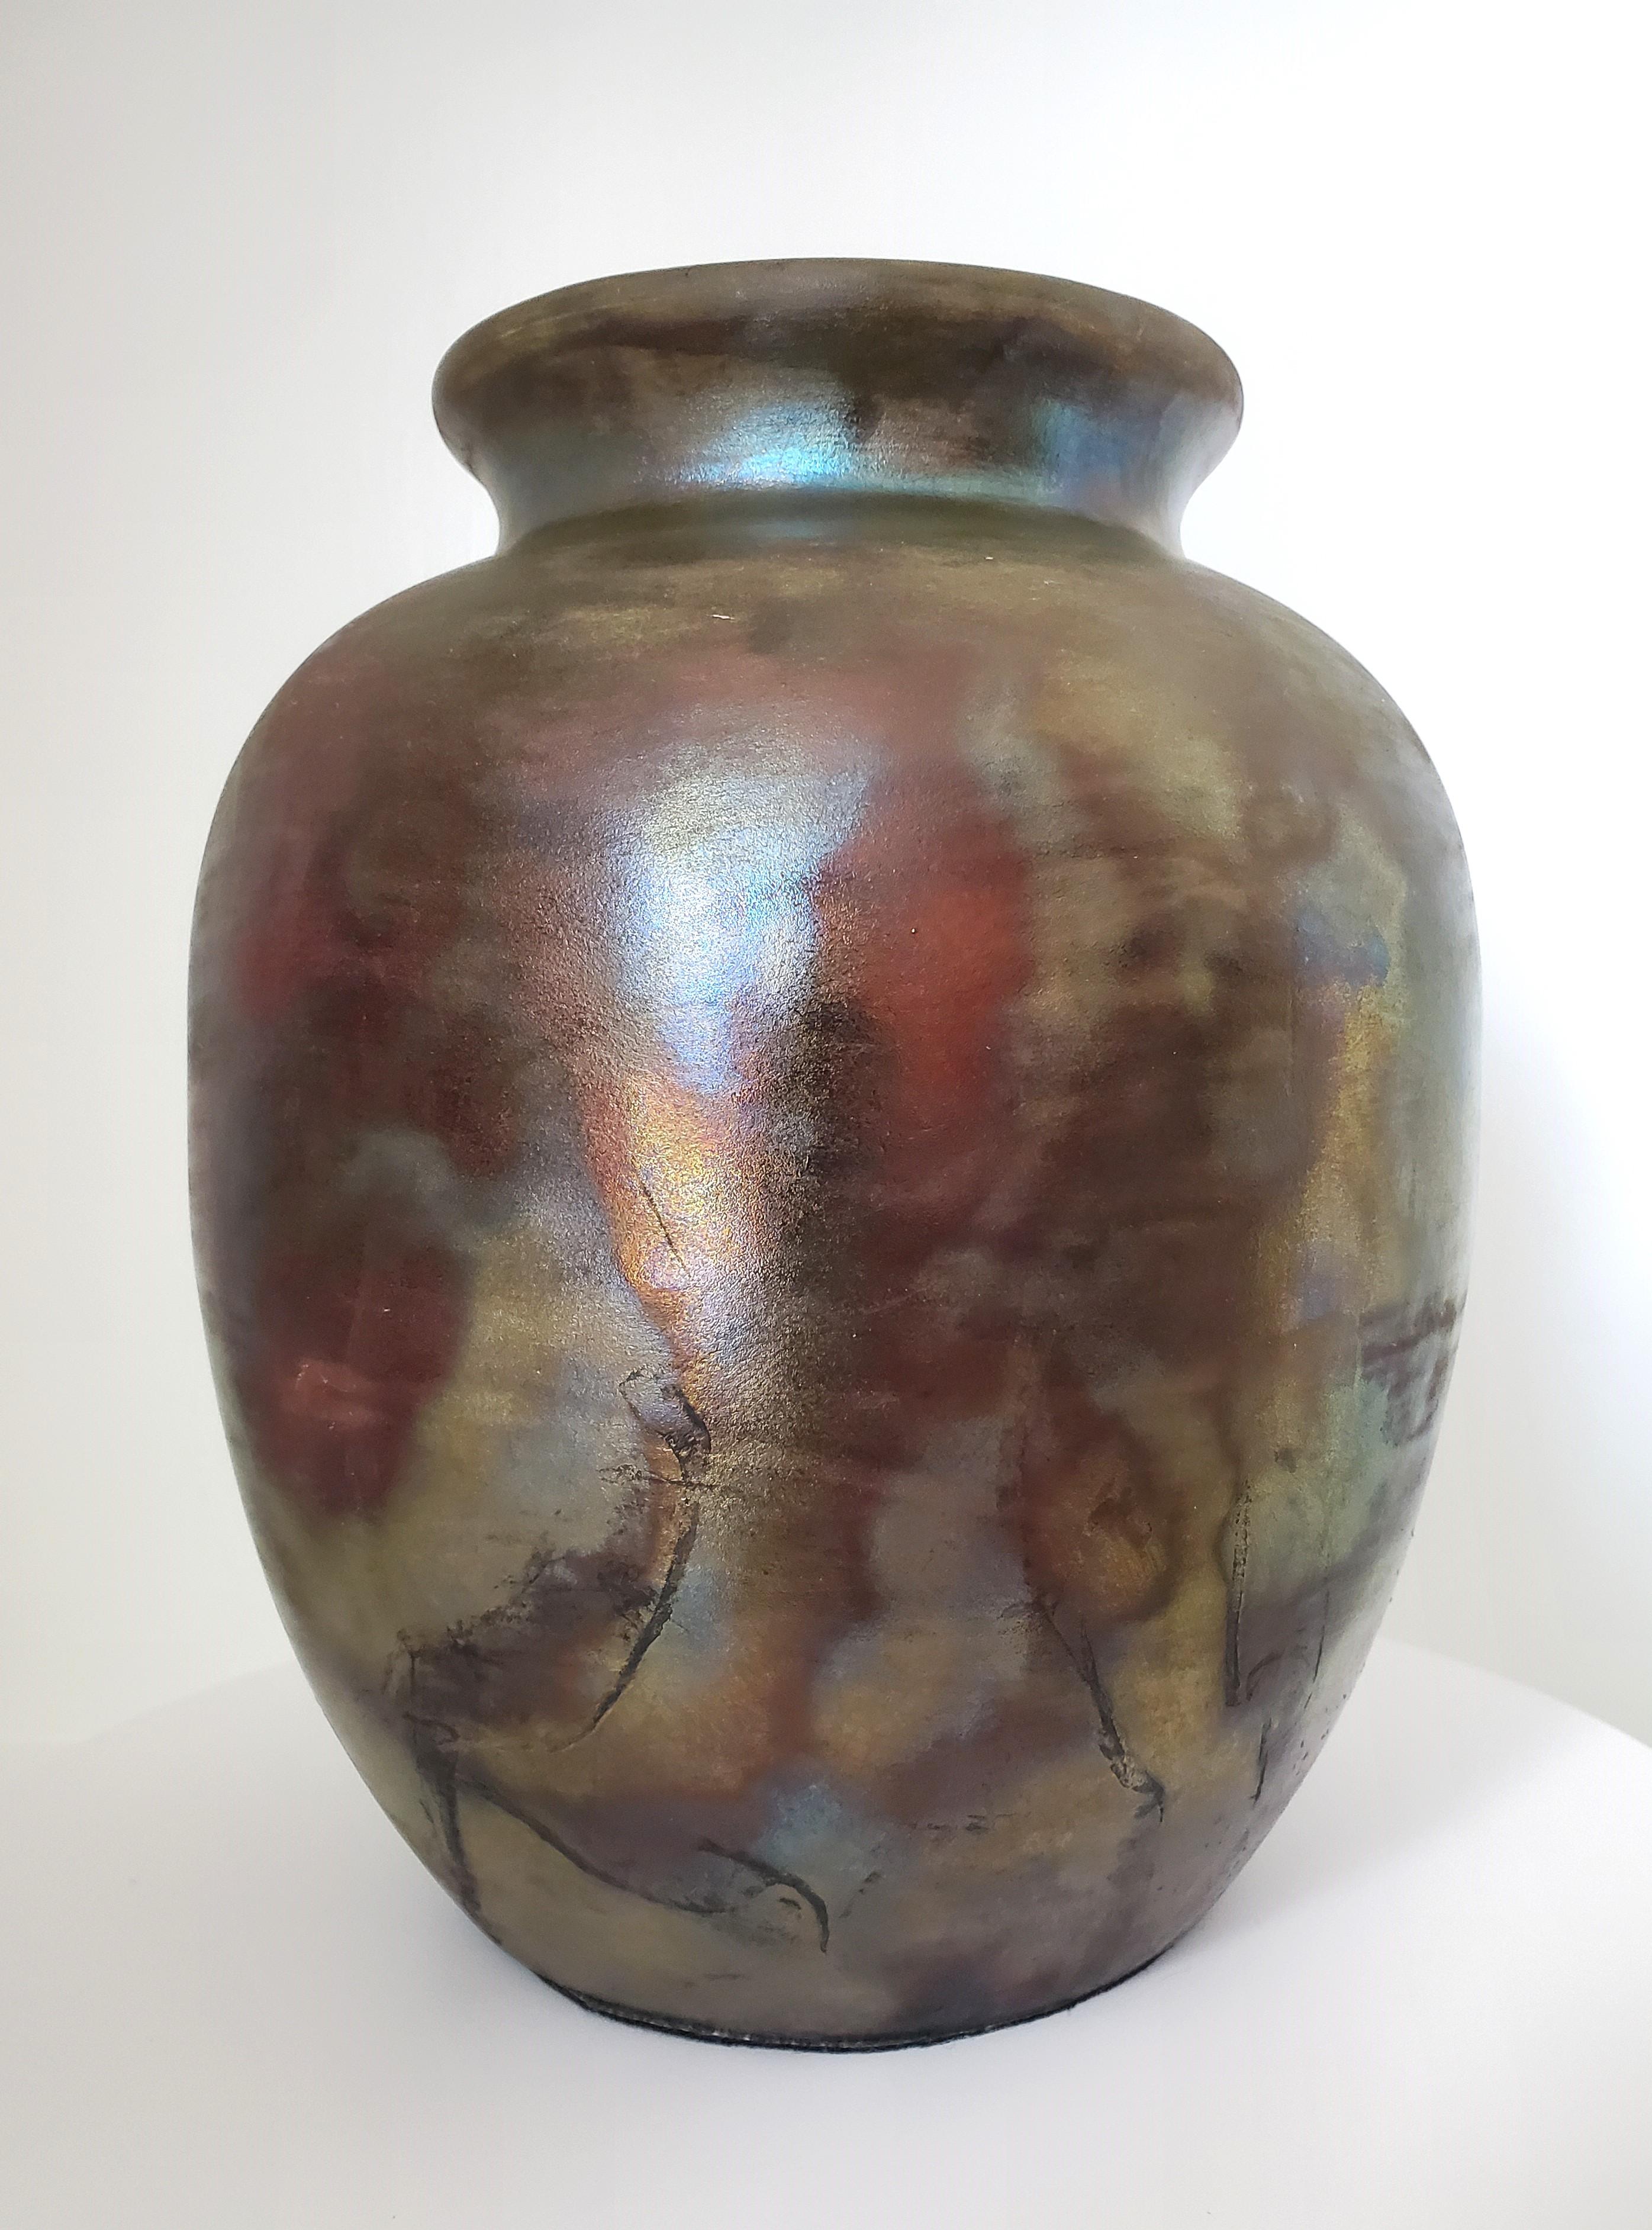 This copper glazed raku pottery vase from NW Raku Gallery is a stunning addition to any traditional or modern décor, such as art deco, mid-century modern, or farmhouse style. This raku pottery vase was made by the Navajo People in the Northwest